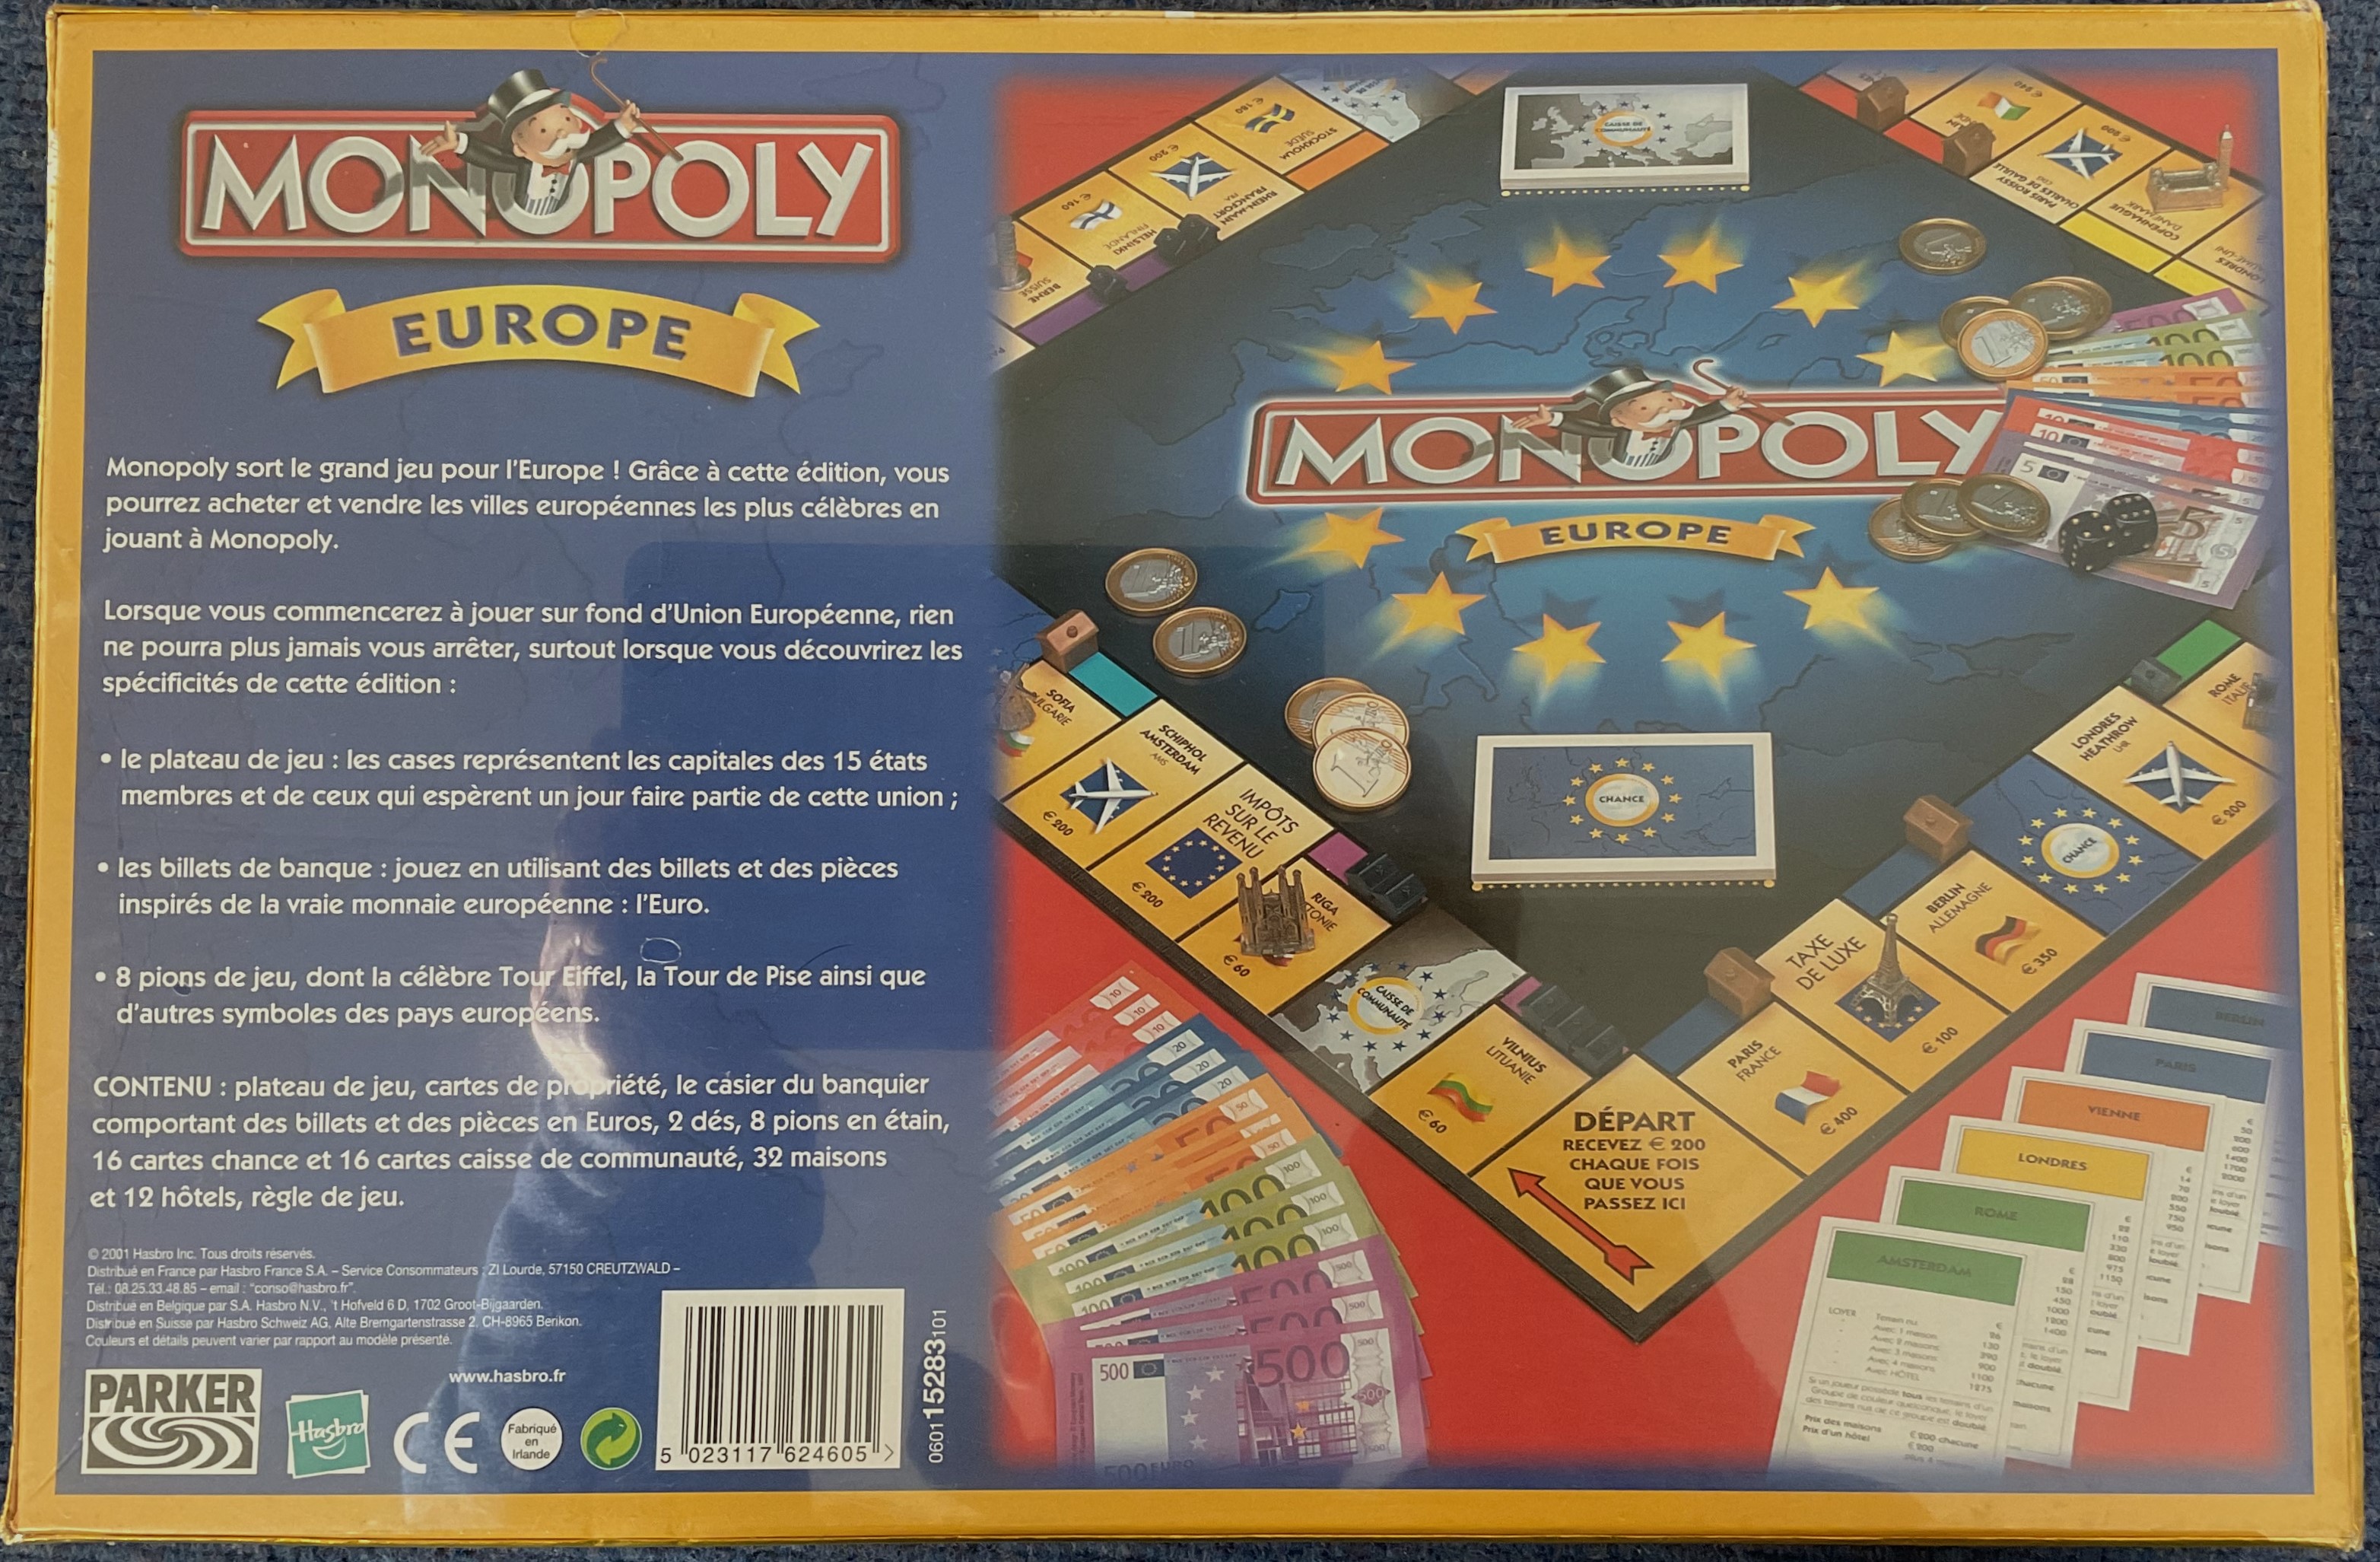 Monopoly Europe by Parker Brothers / Hasbro 2001, unopened and still has its outer cellophane